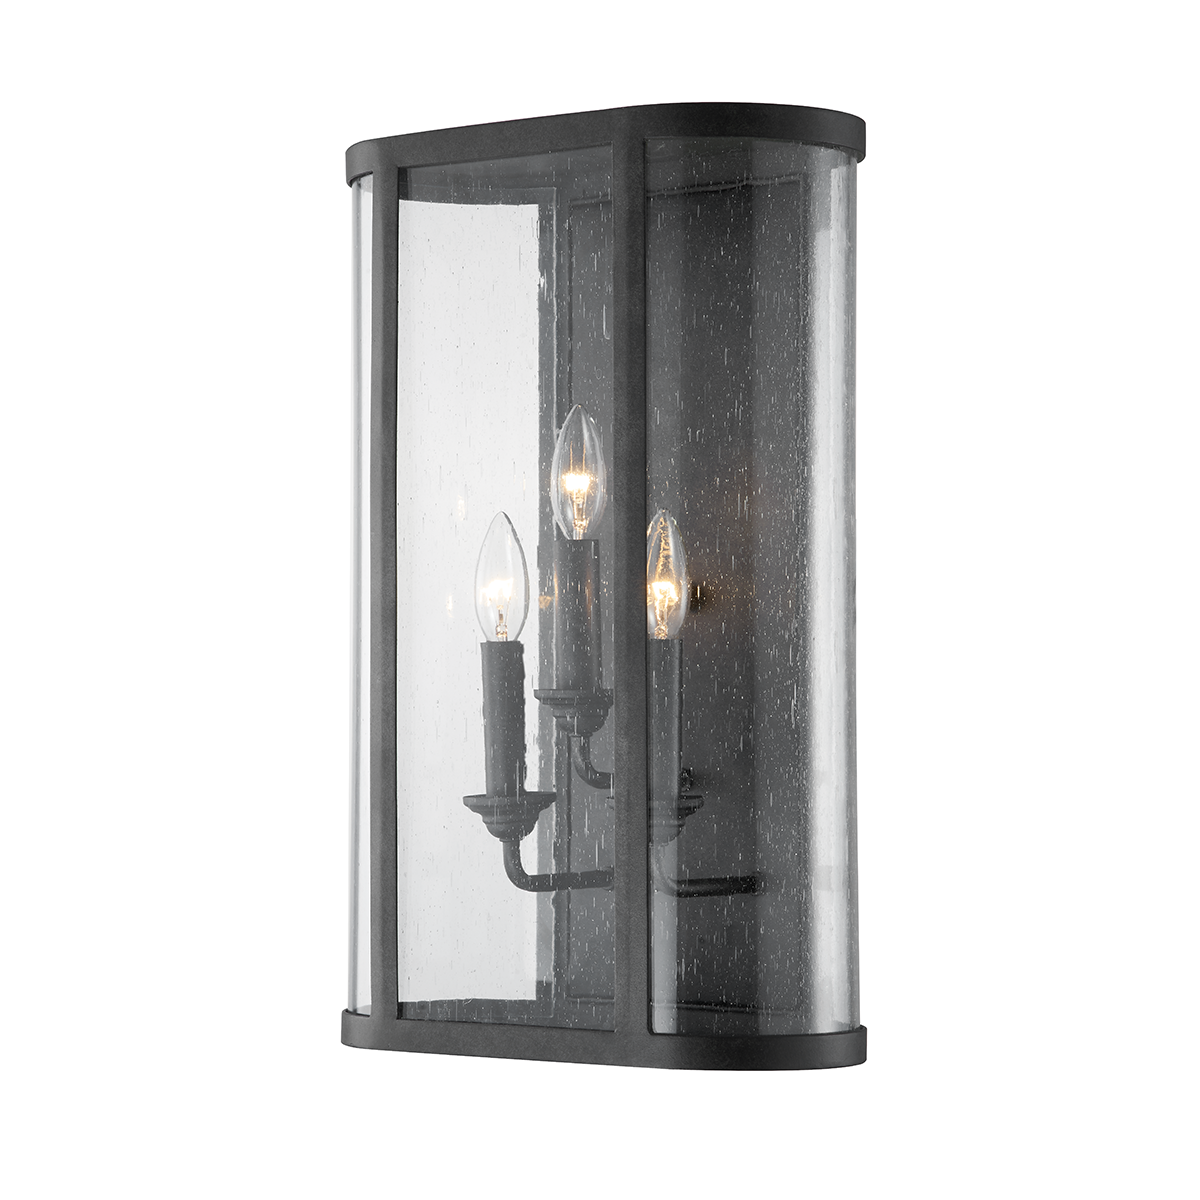 Troy Lighting 3 LIGHT LARGE EXTERIOR WALL SCONCE B3403